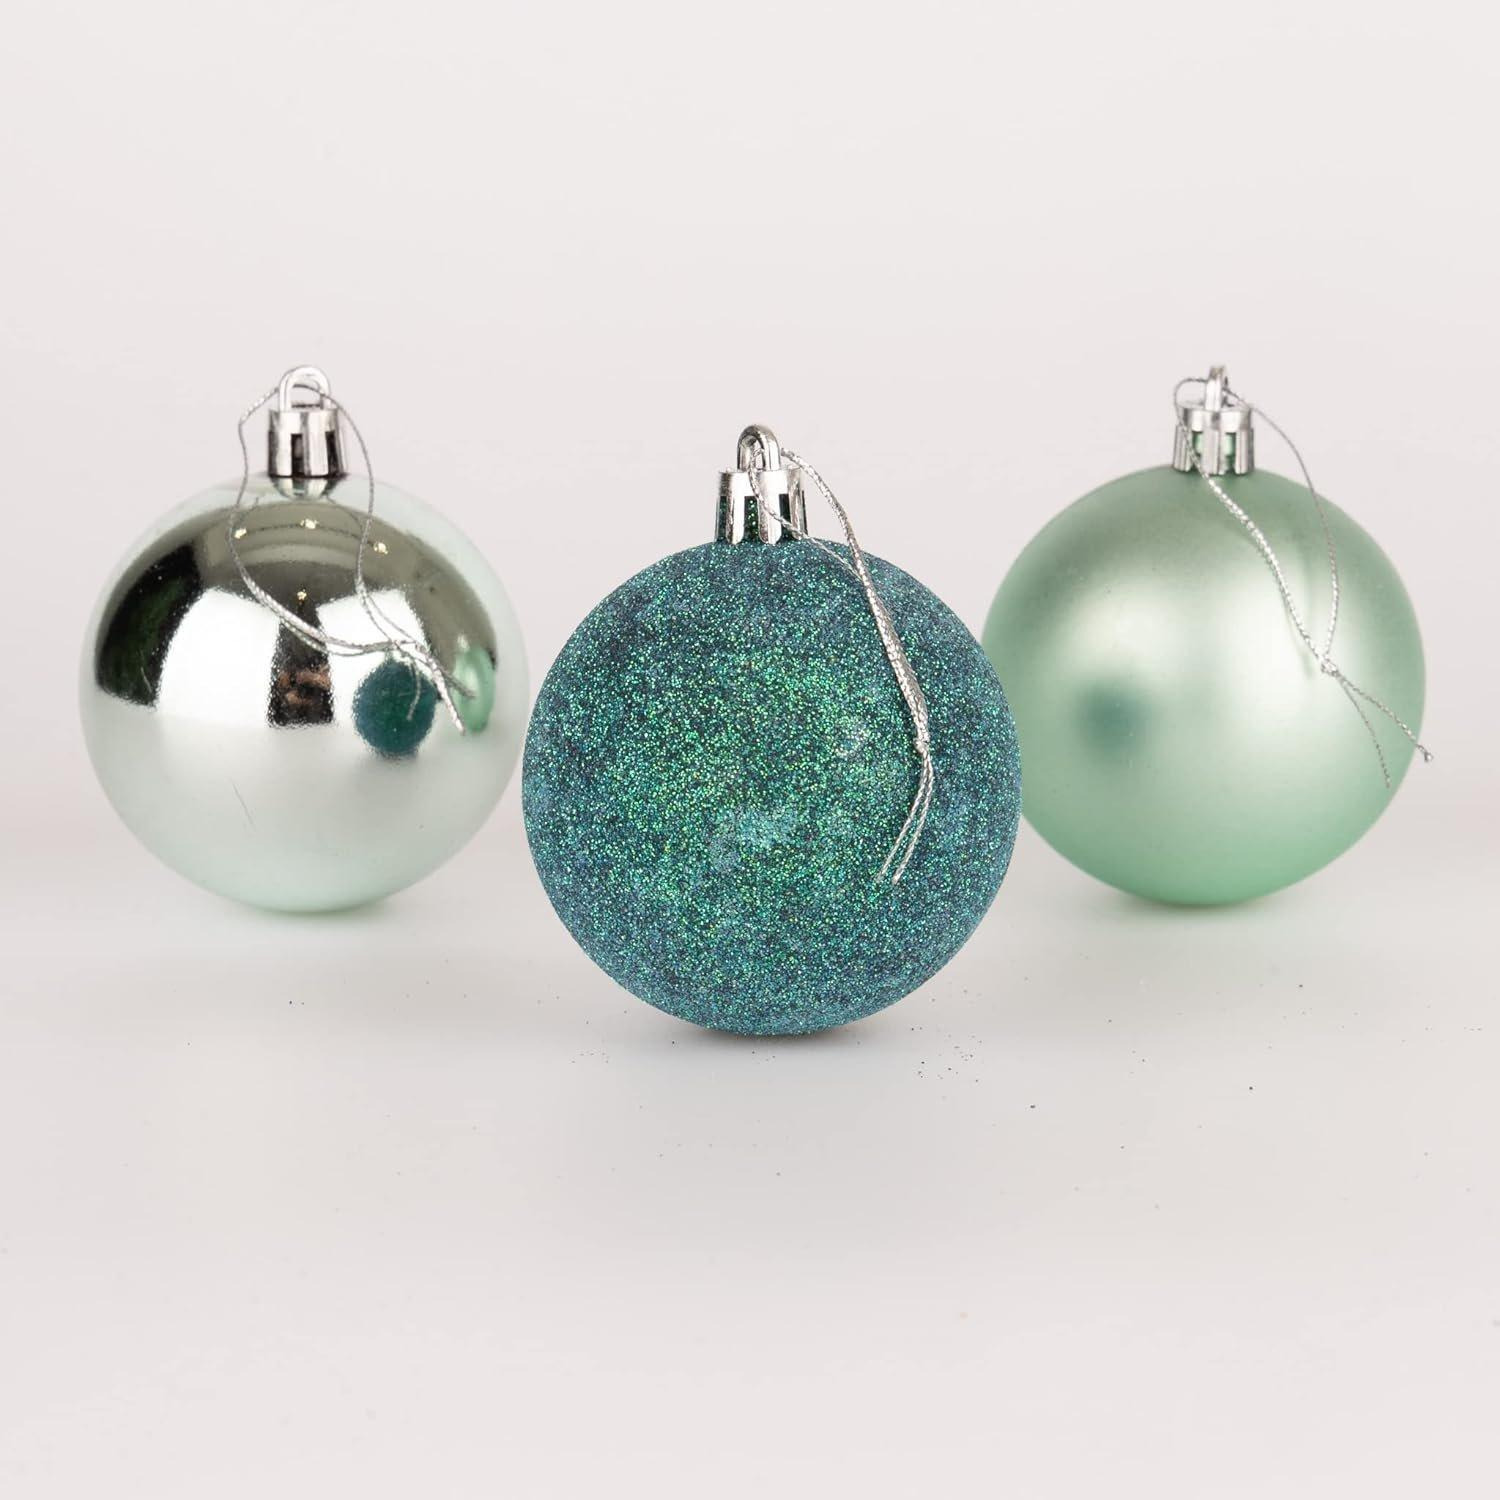 50mm/12Pcs Christmas Baubles Shatterproof Turquoise,Tree Decorations - image 1